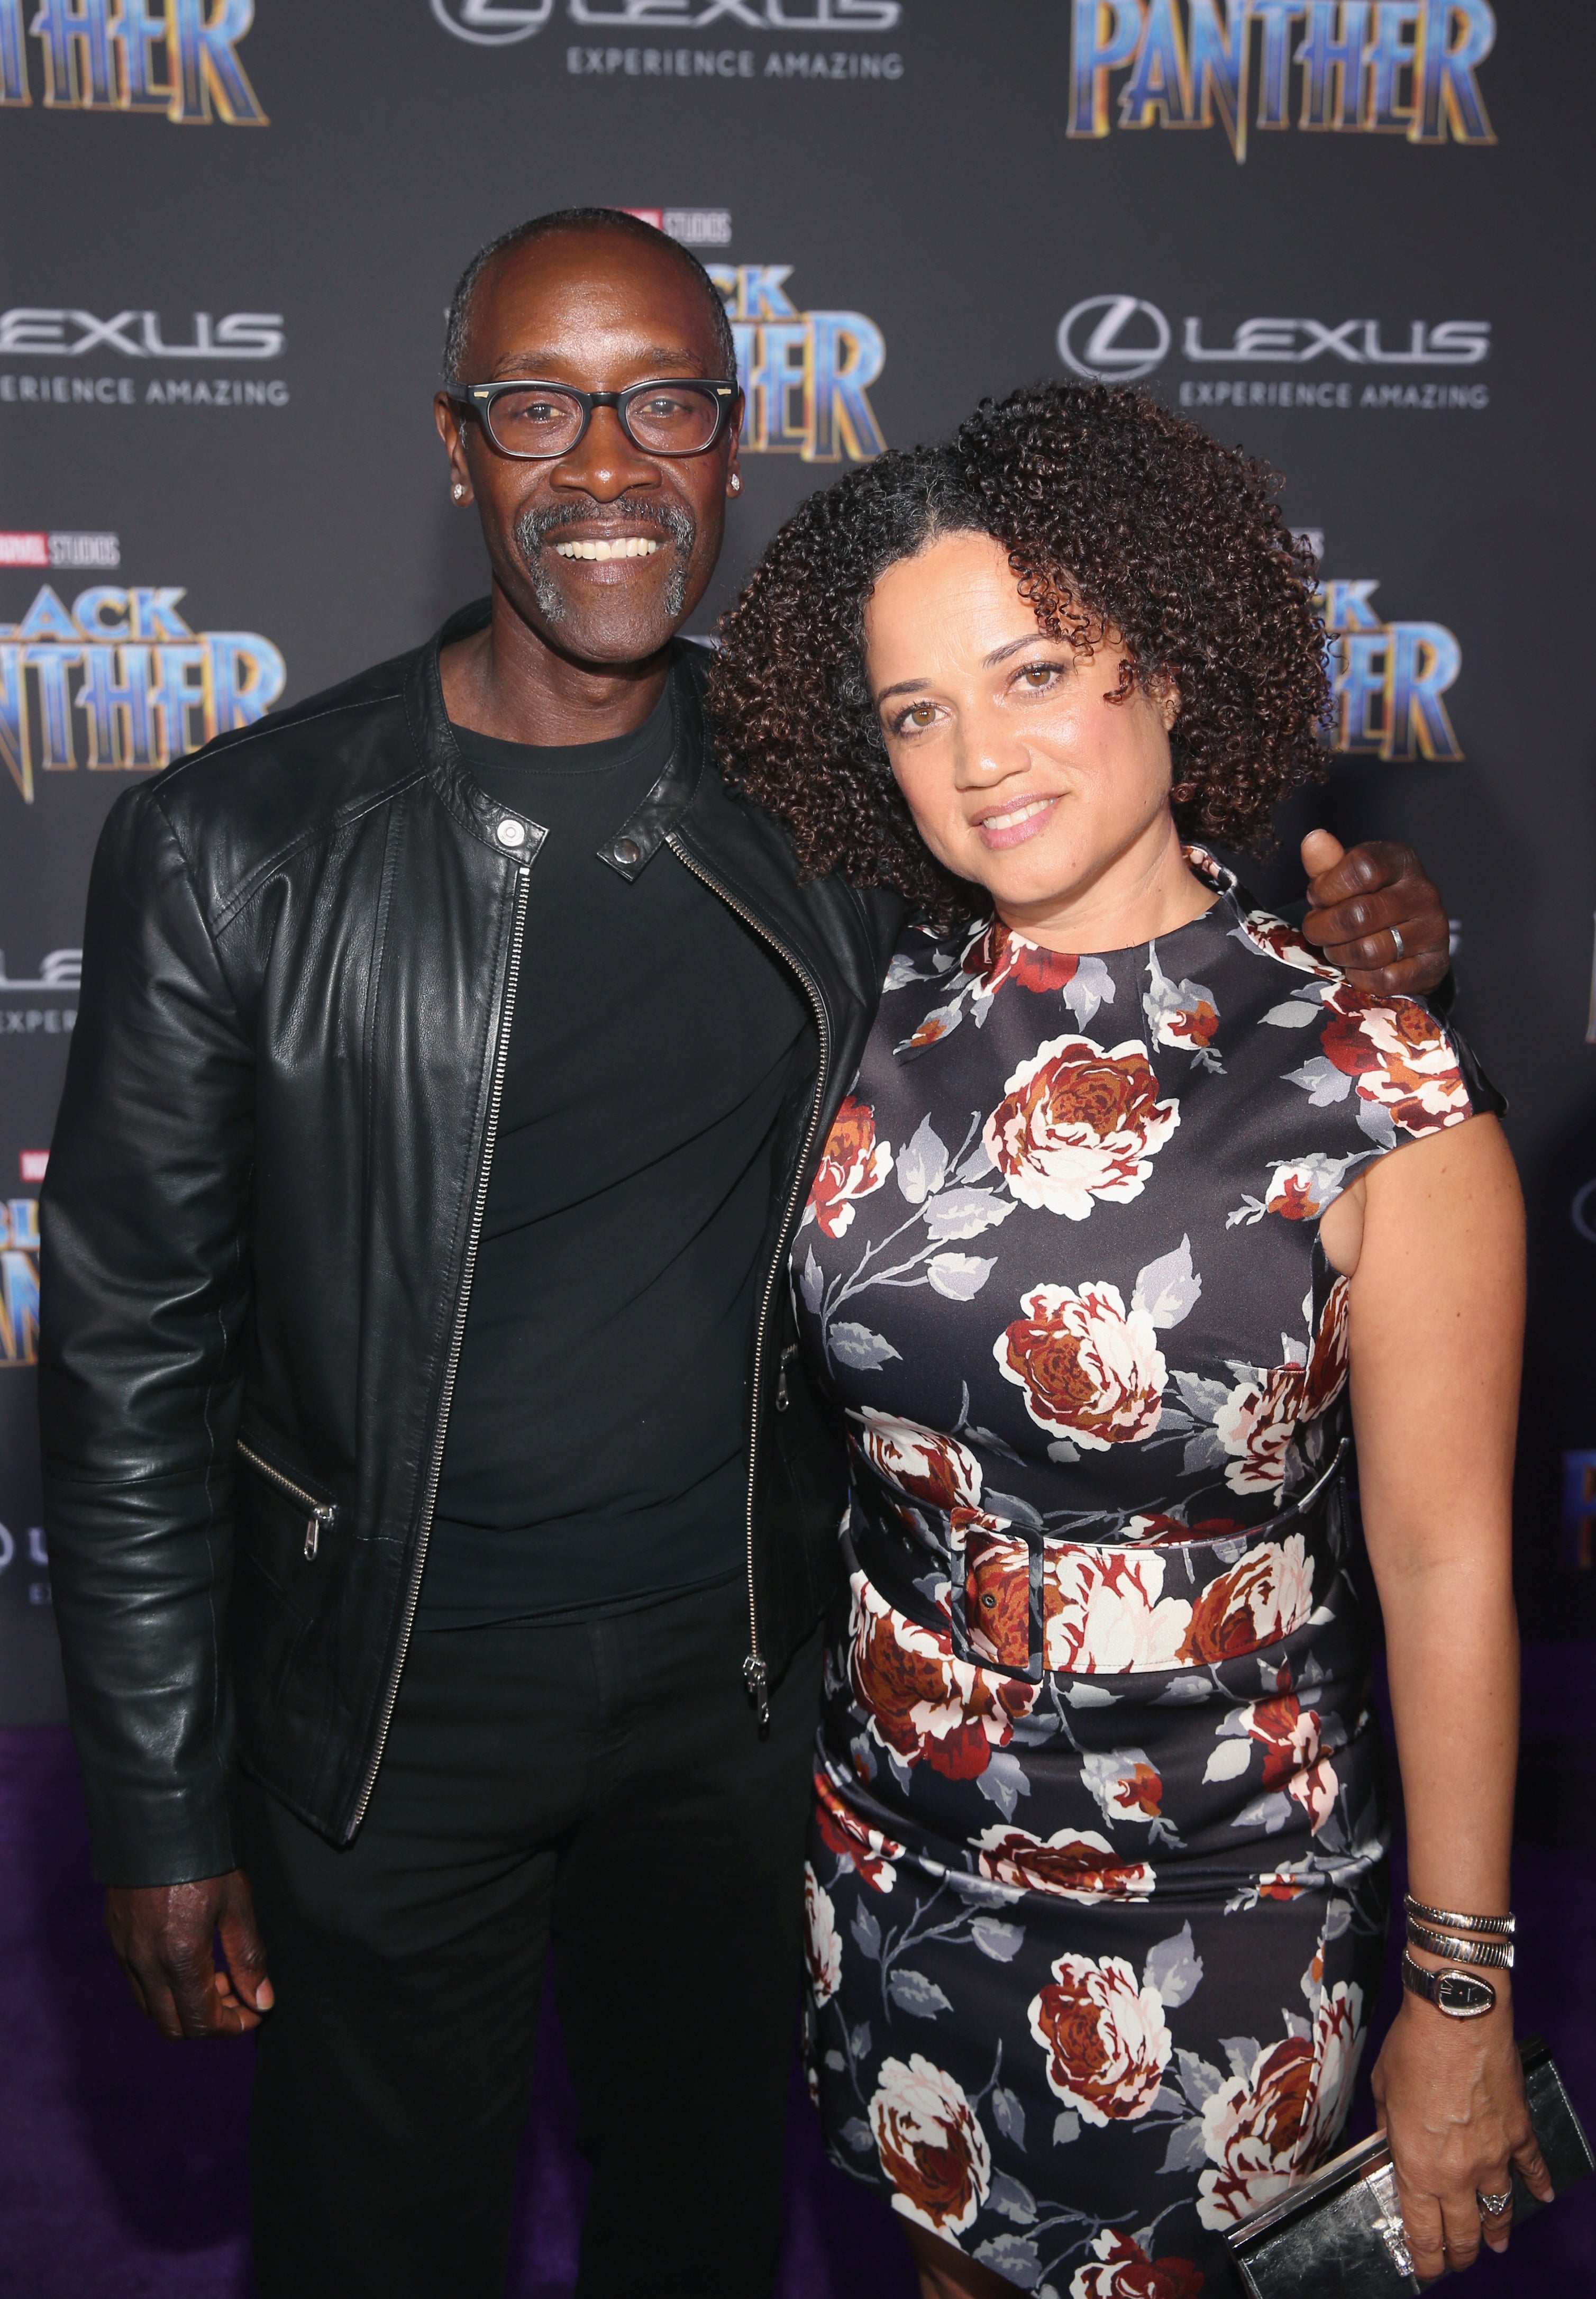 These Couples Had An Epic Date Night At The 'Black Panther' Premiere
